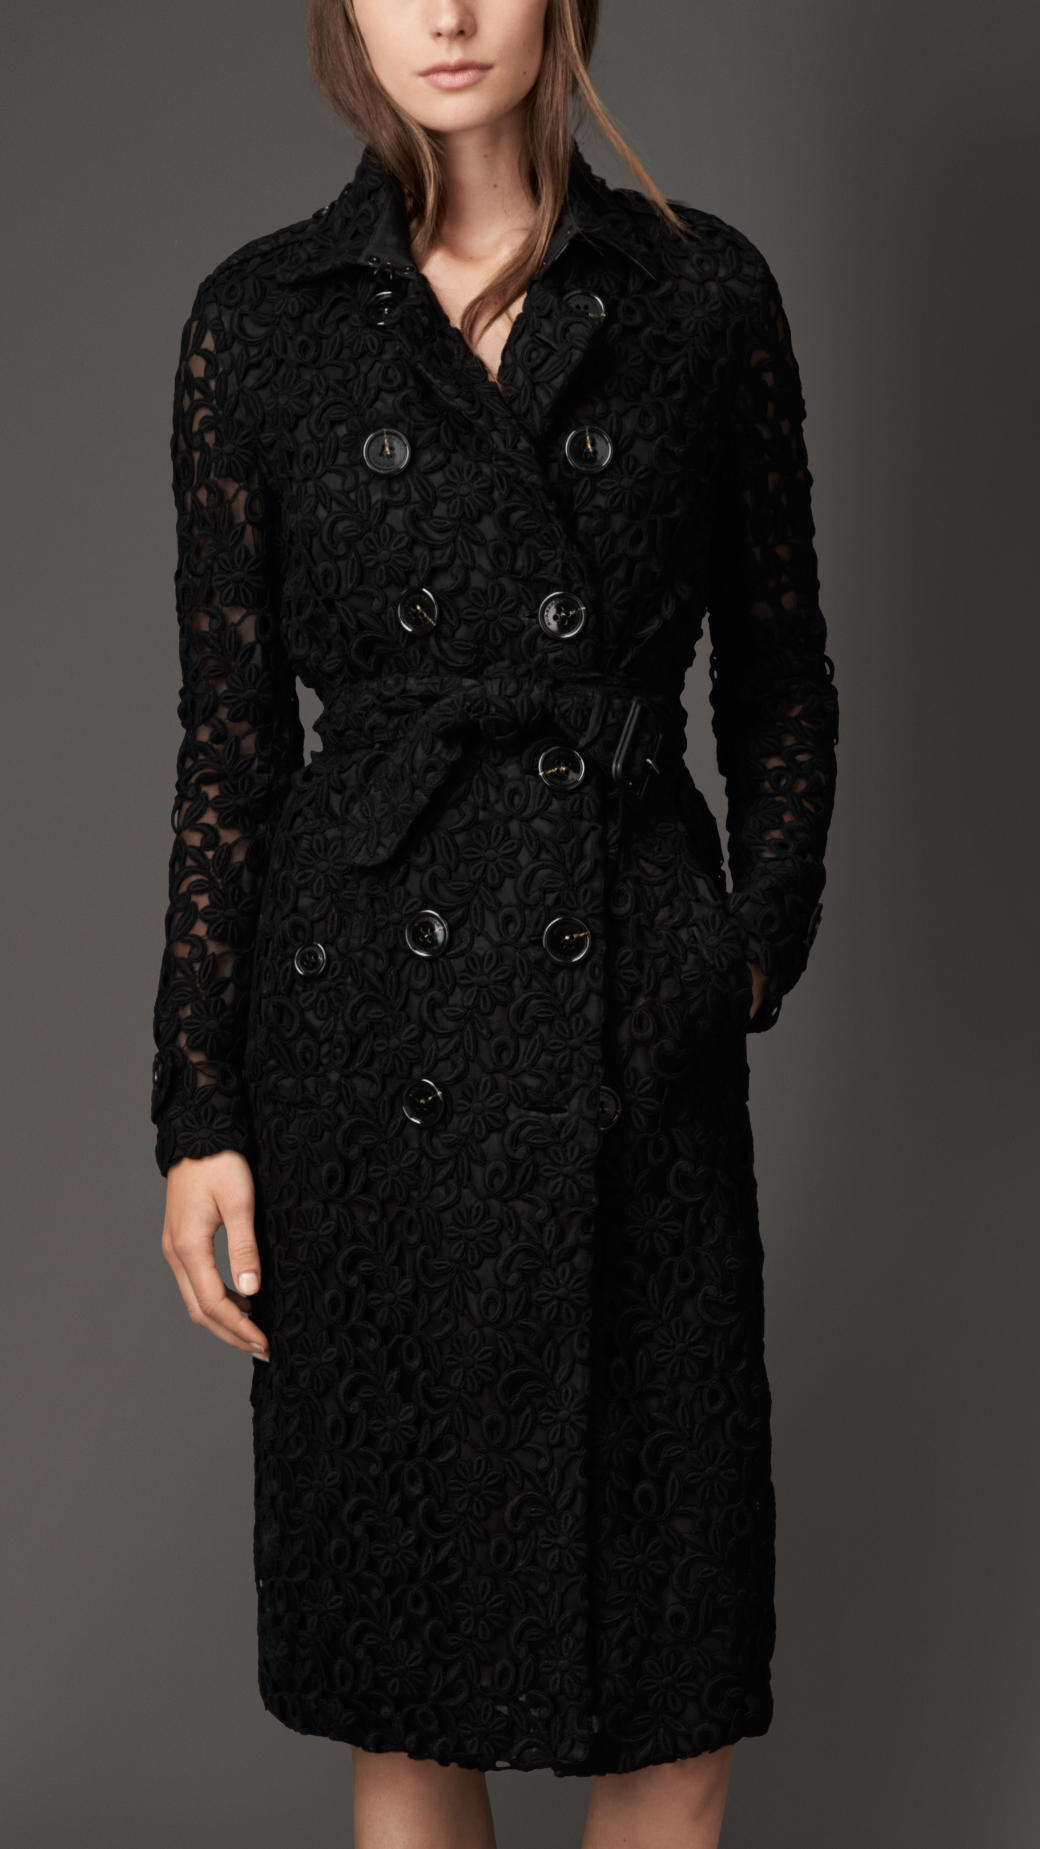 Burberry Floral Lace Trench Coat in Black - Lyst